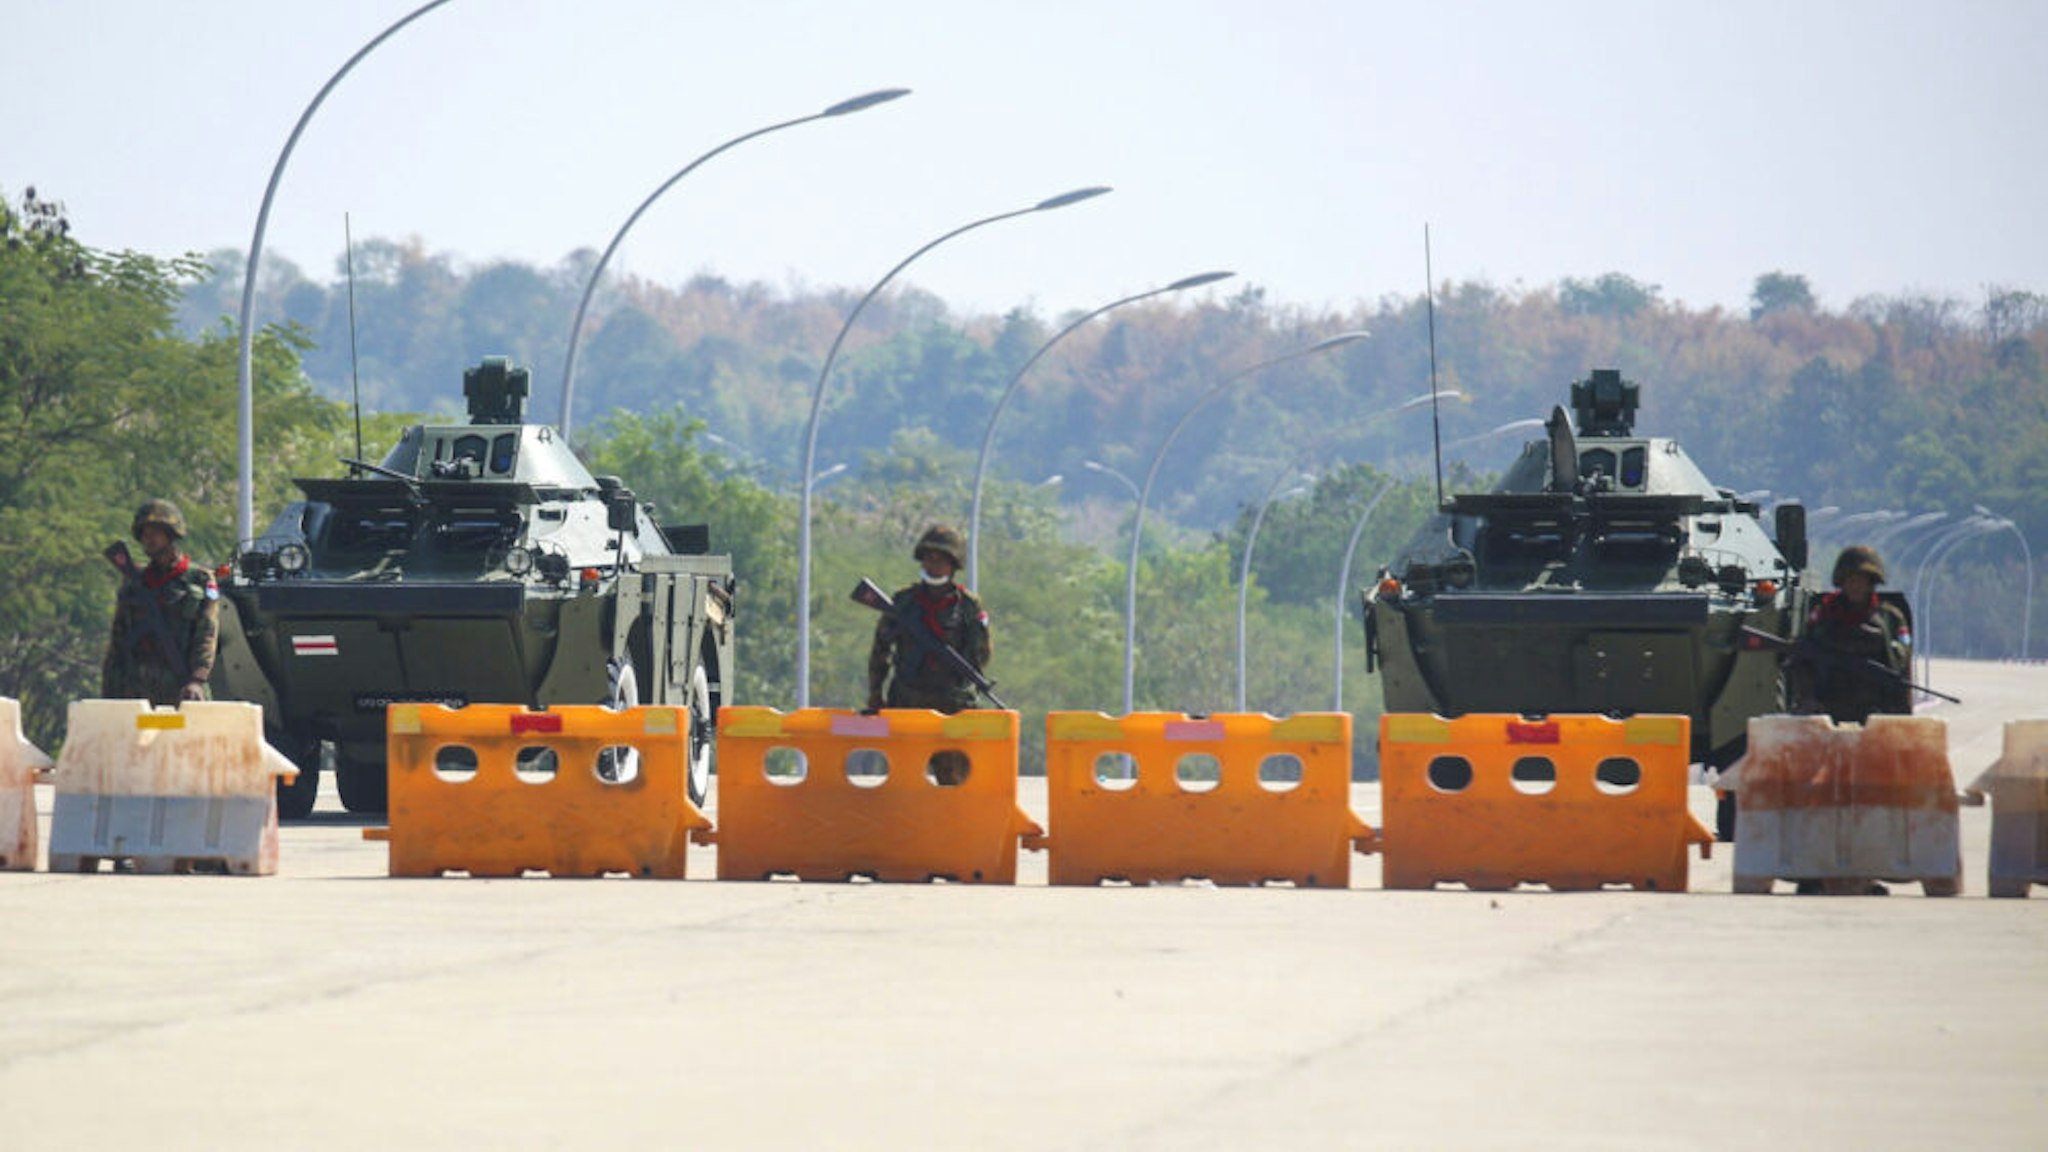 NAYPYIDAW, MYANMAR - FEBRUARY 01: Military soldiers with tanks and police truck block the road near parliament in Naypyidaw this afternoon in Myanmar on February 1, 2021. Myanmar's military announced Monday that it has seized power and will rule the country for at least one year after detaining its top political leaders.